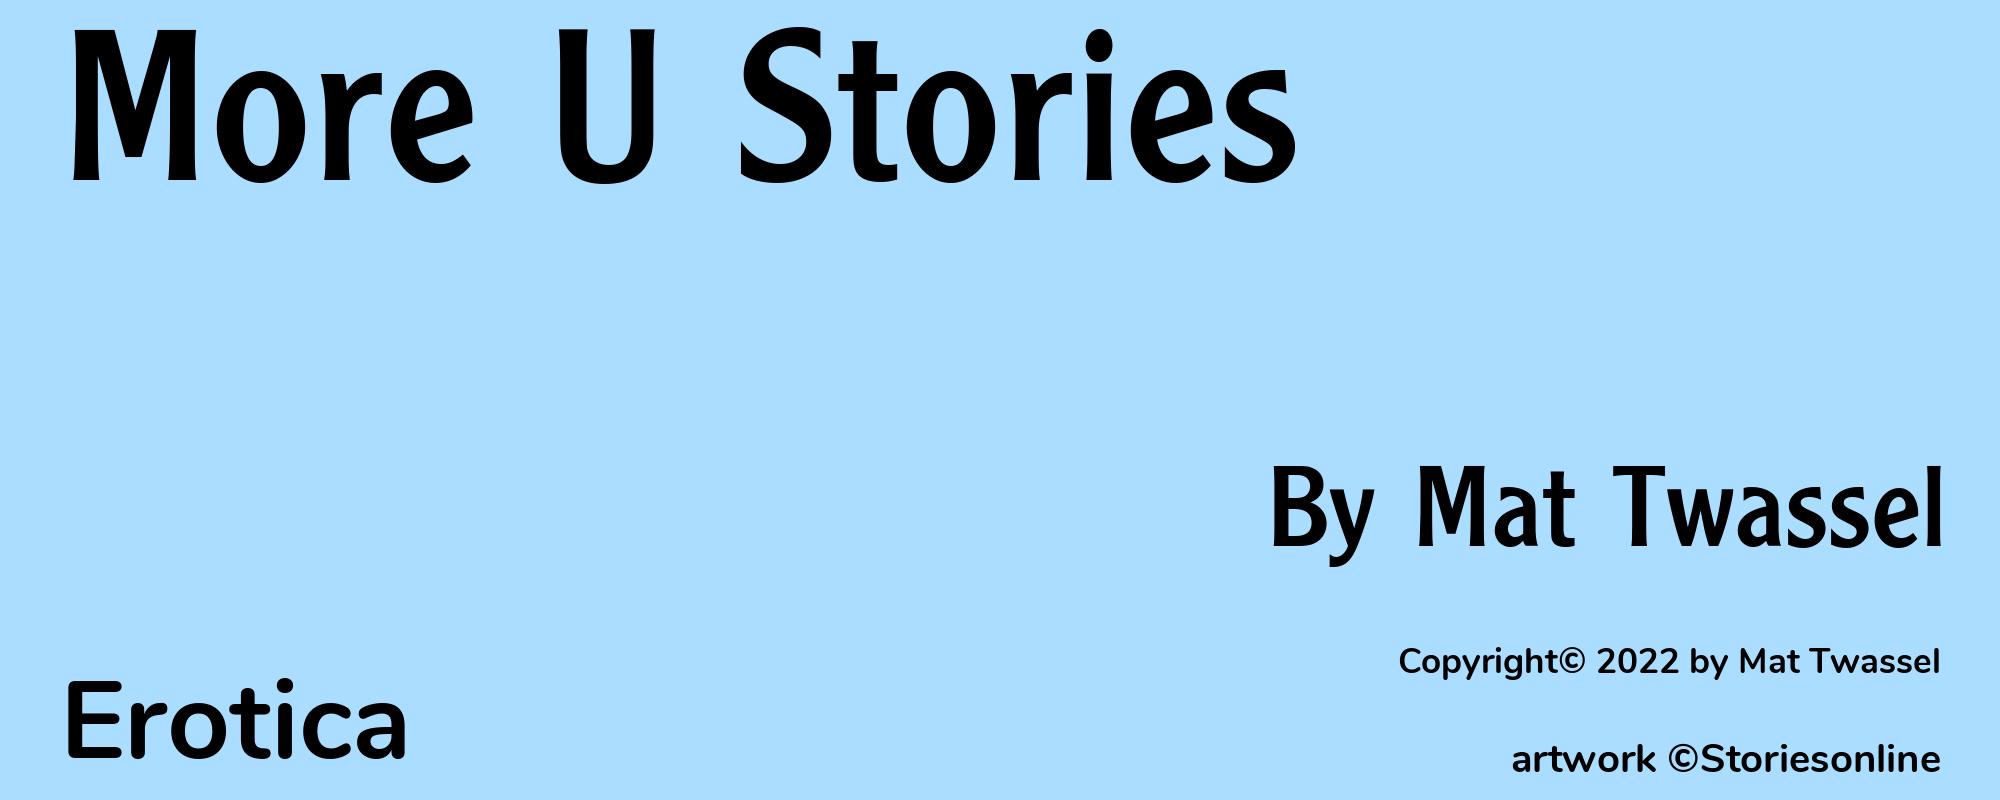 More U Stories - Cover